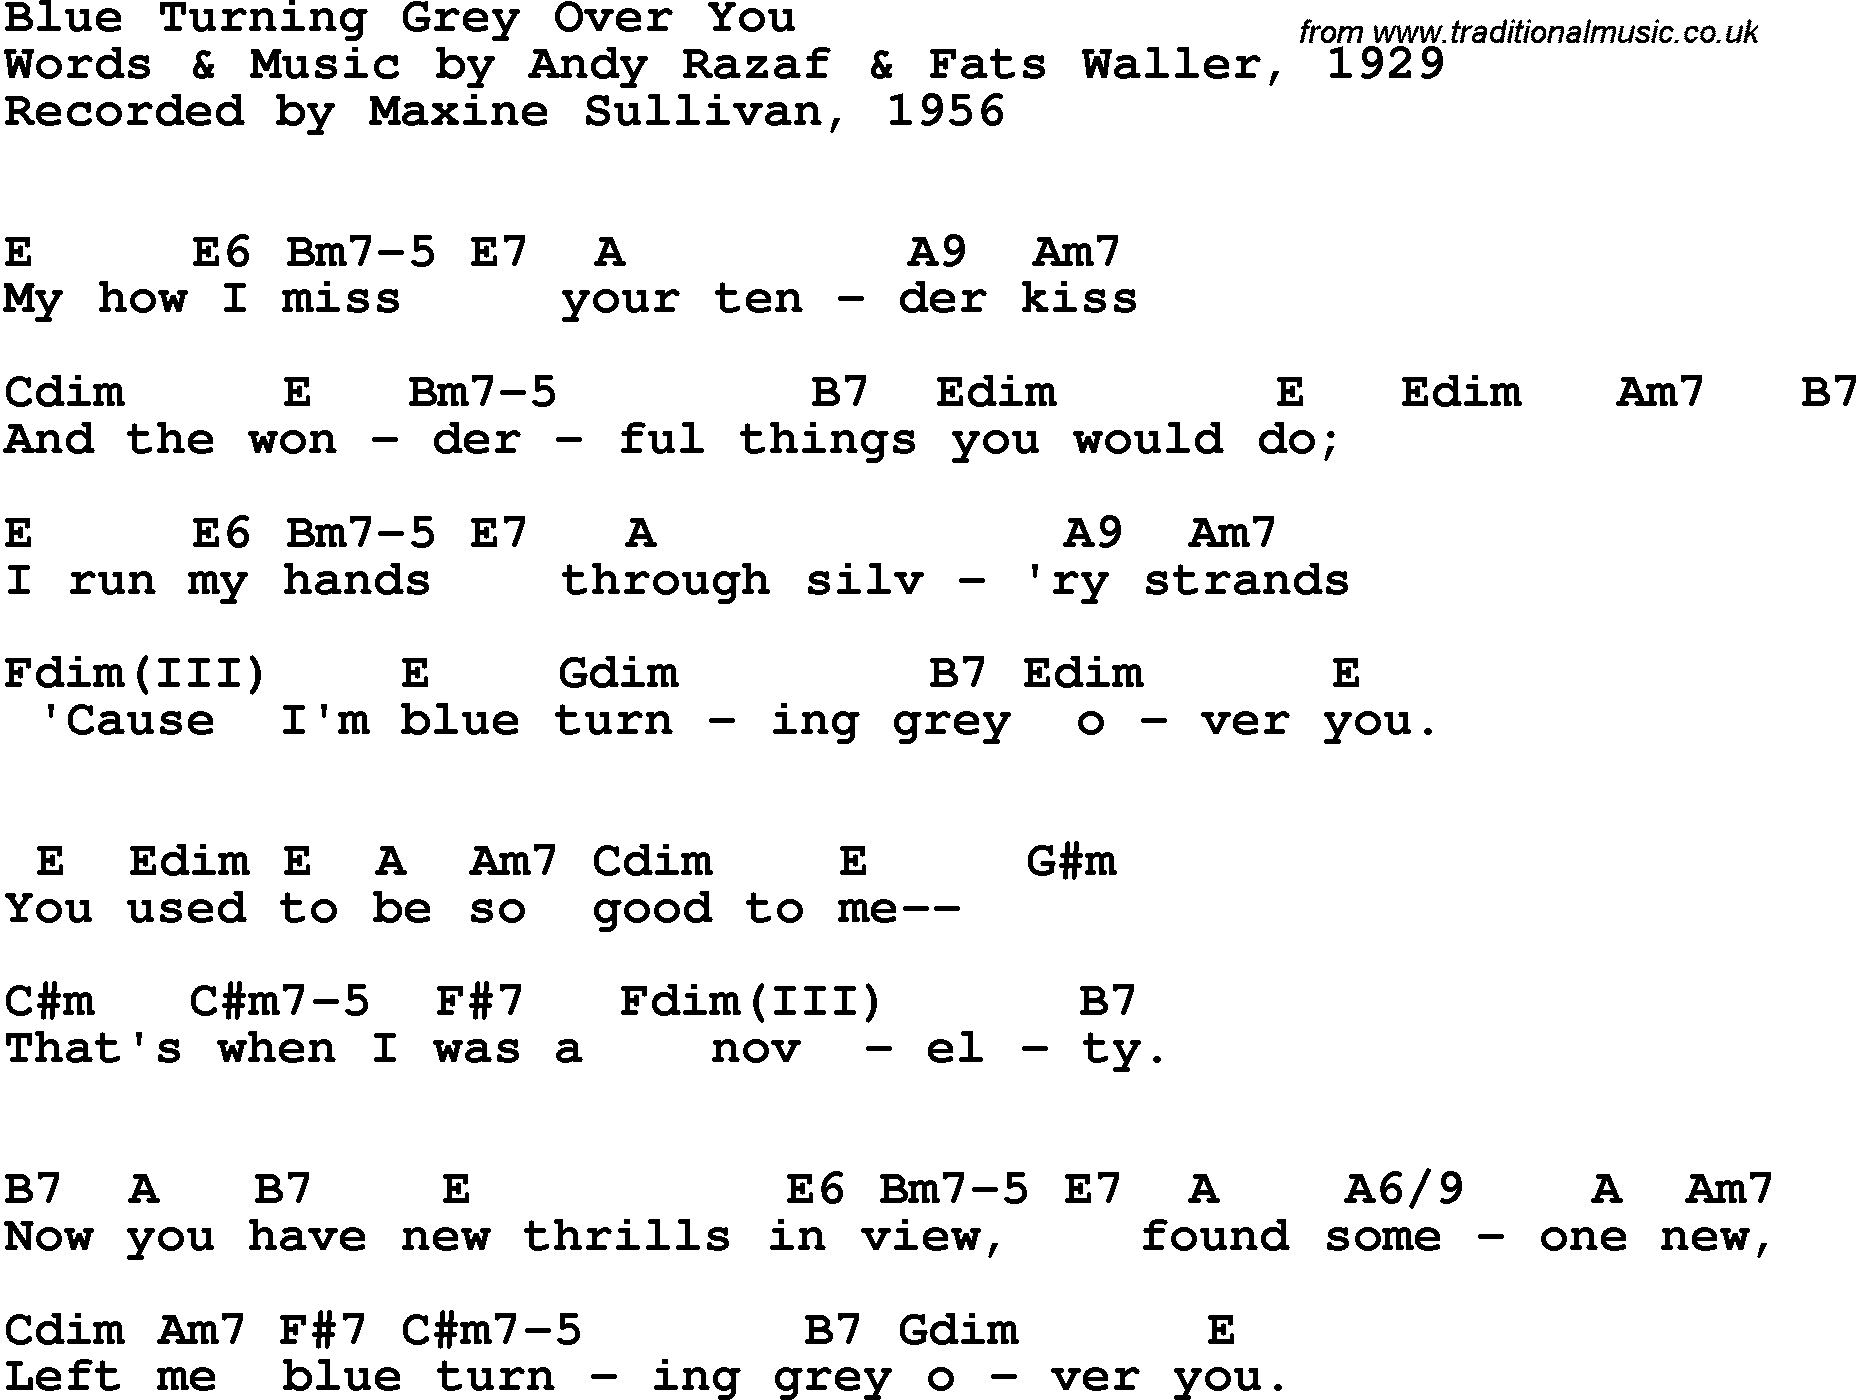 Song Lyrics with guitar chords for Blue Turning Grey Over You - Maxine Sullivan, 1956